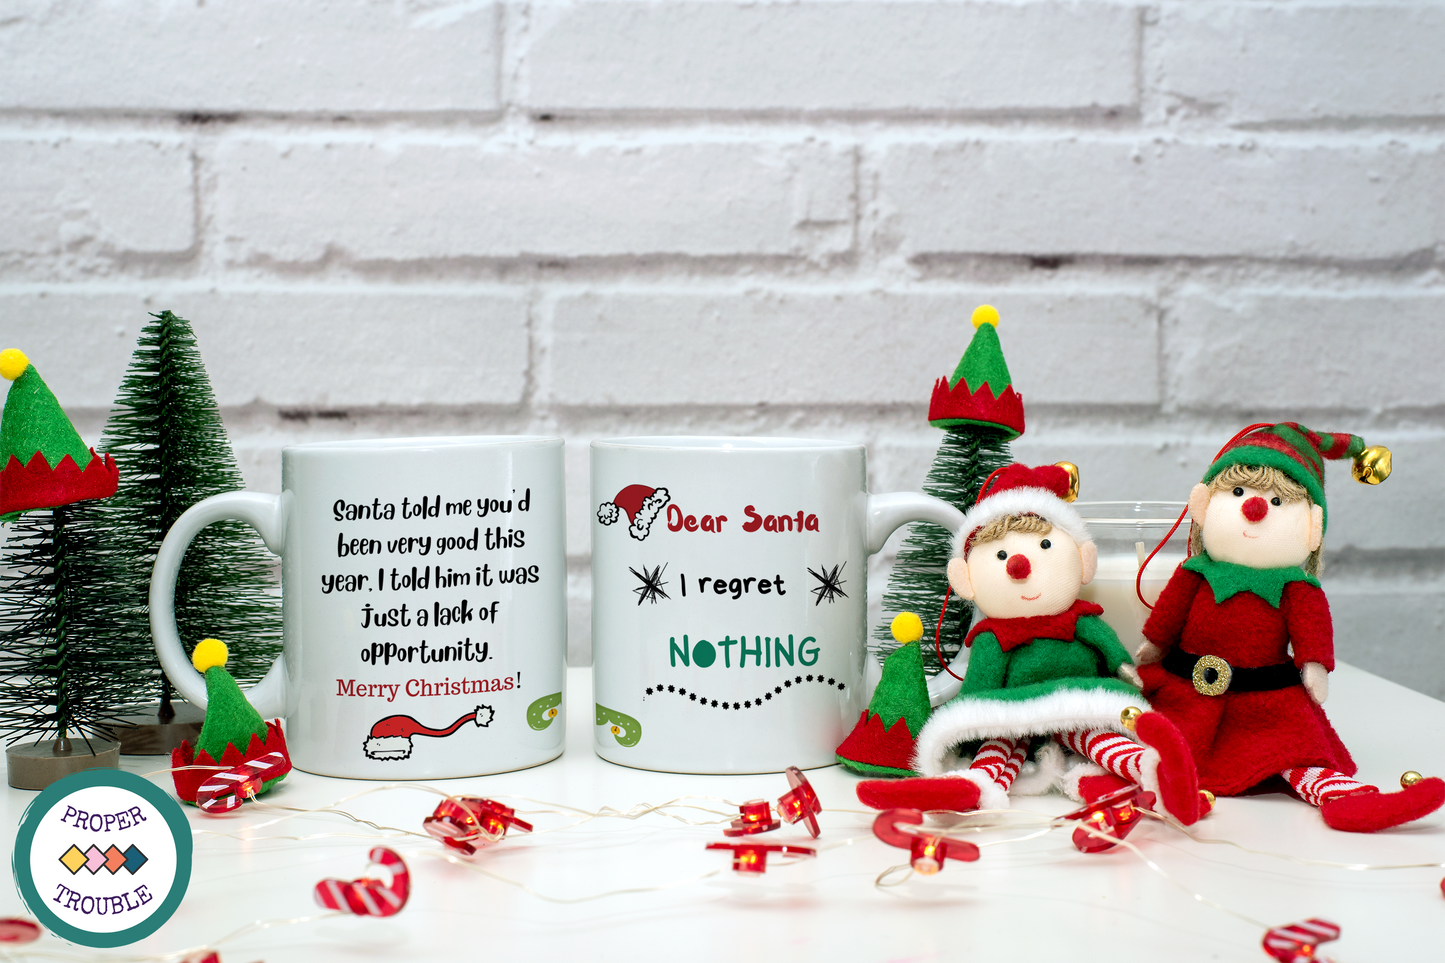 Santa told me you'd been good this year.  I told him it was just lack of opportunity / Dear Santa I regret NOTHING 11 oz Coffee/tea mug